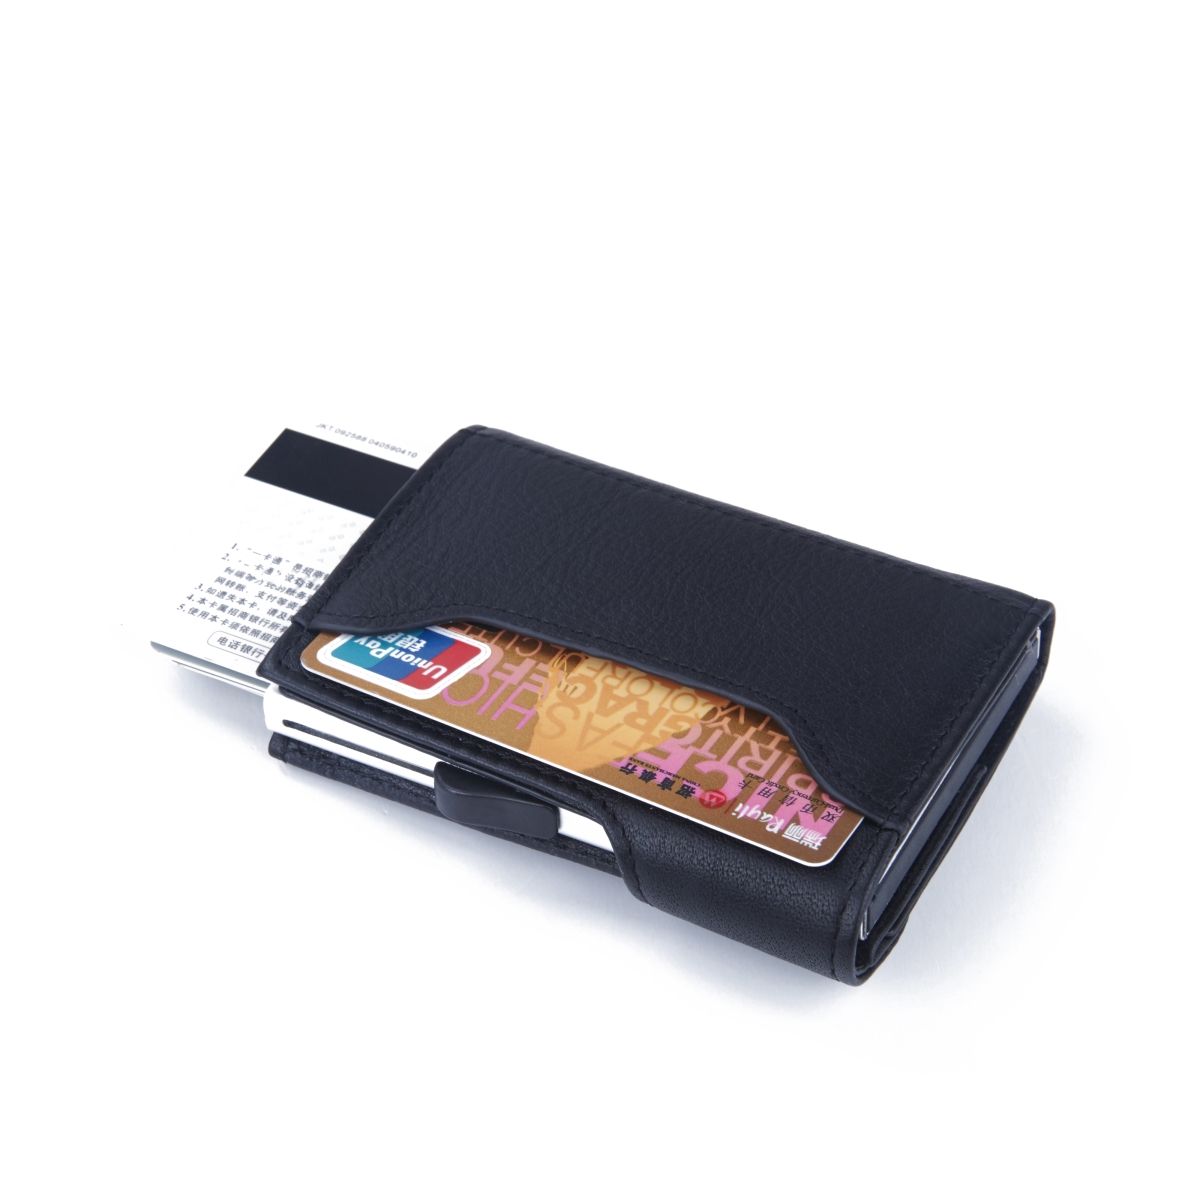 C-Secure Aluminum Card Holder with Genuine Leather - Black